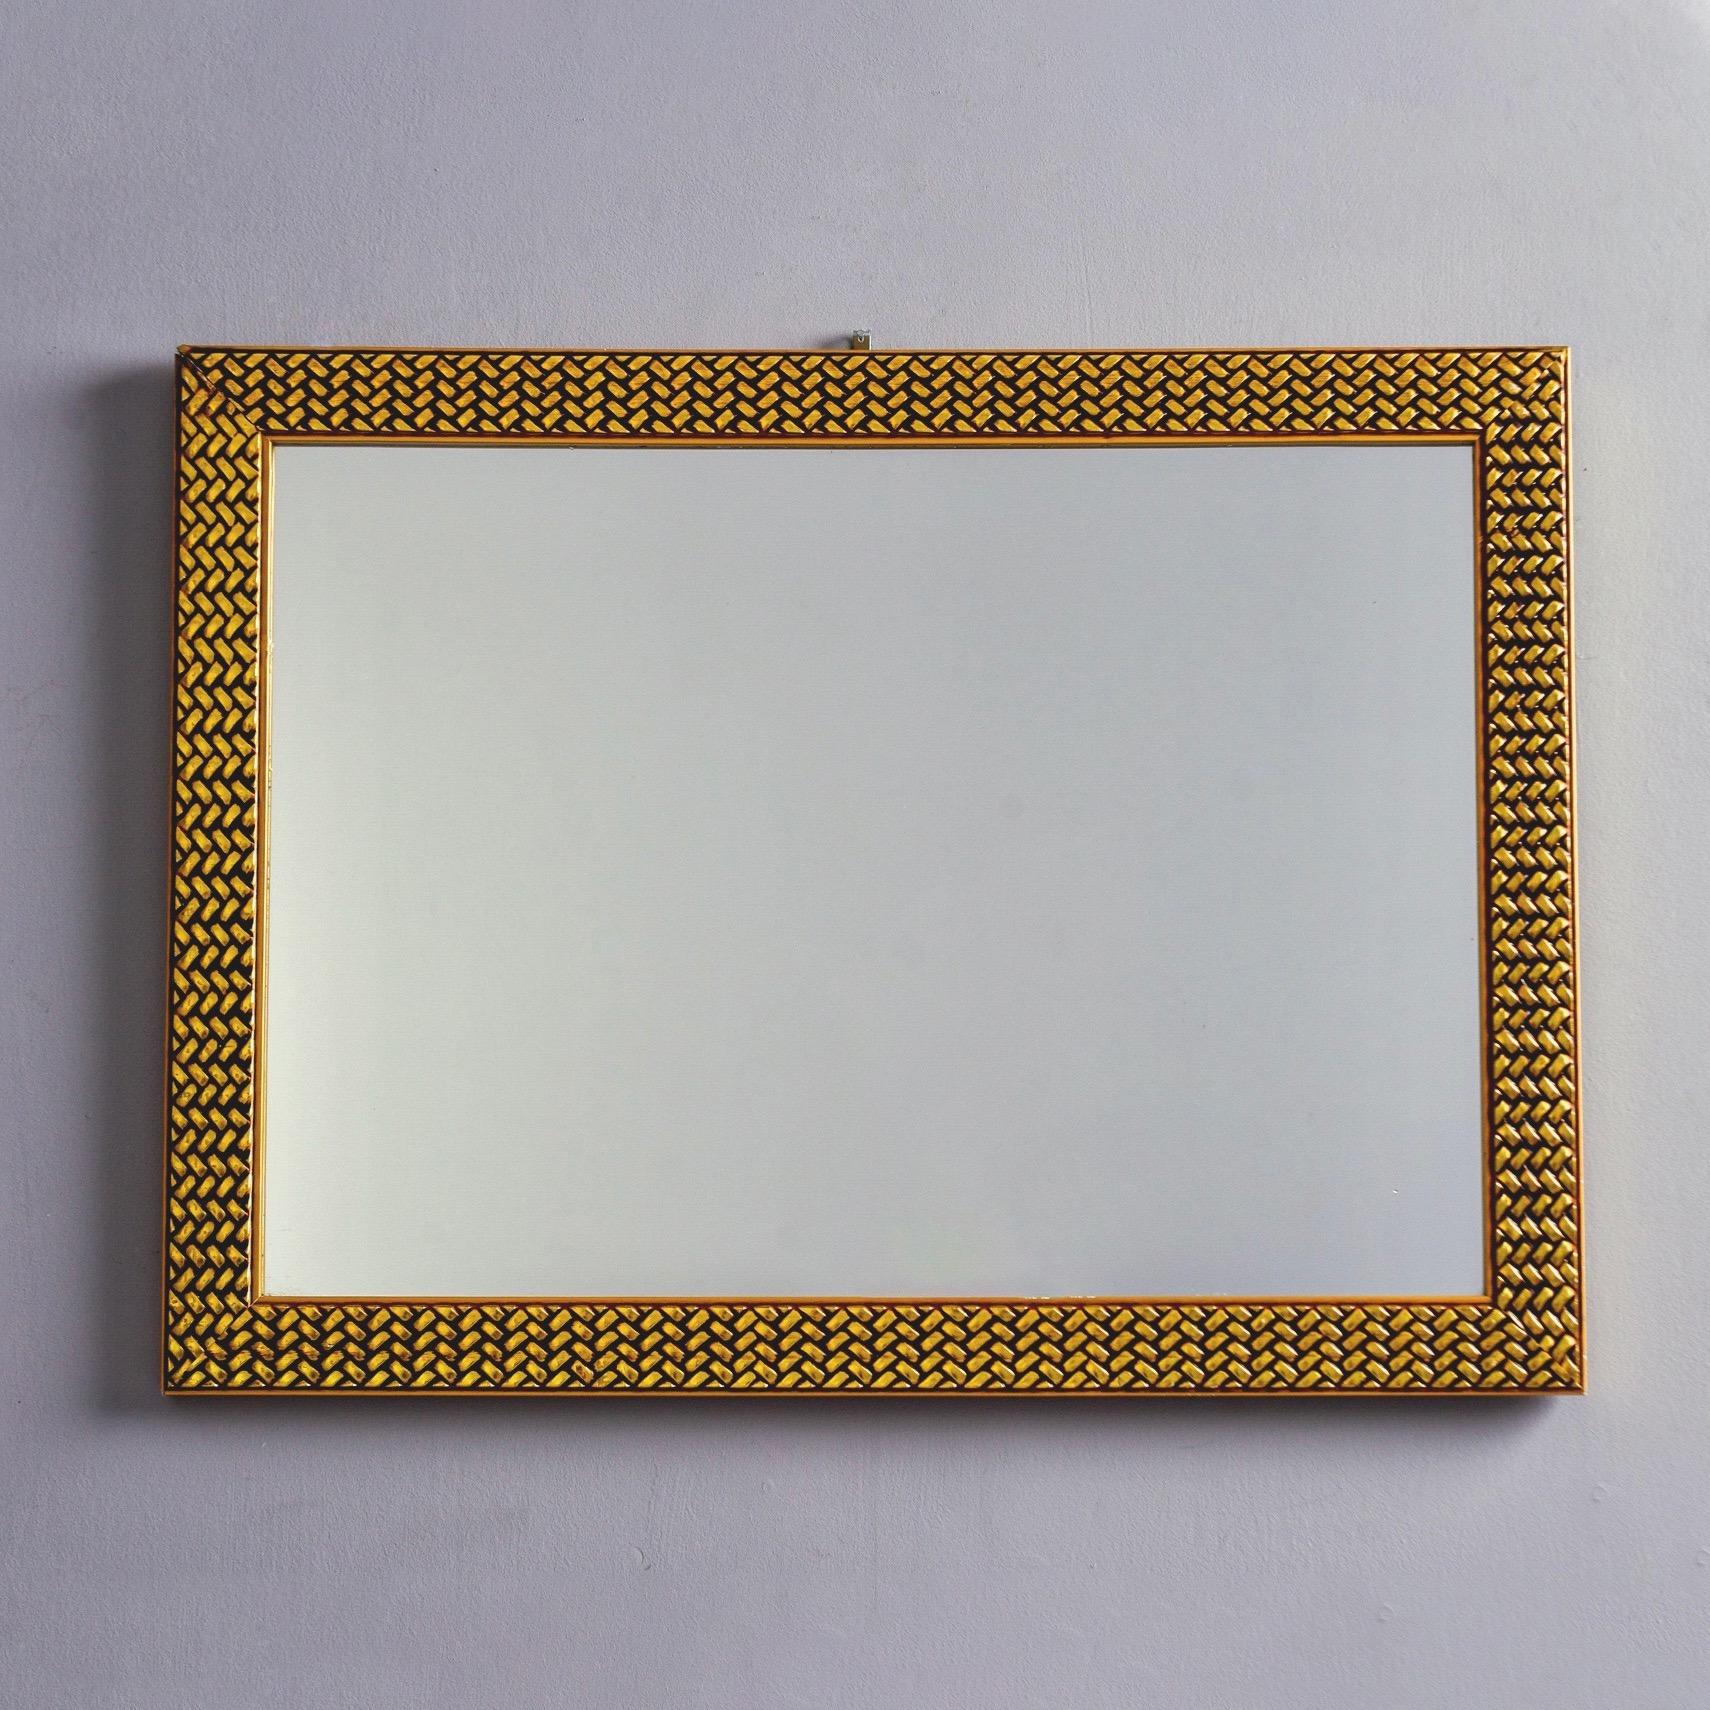 Mid-Century Modern Midcentury Mirror with Woven Texture Gilded Finish Frame